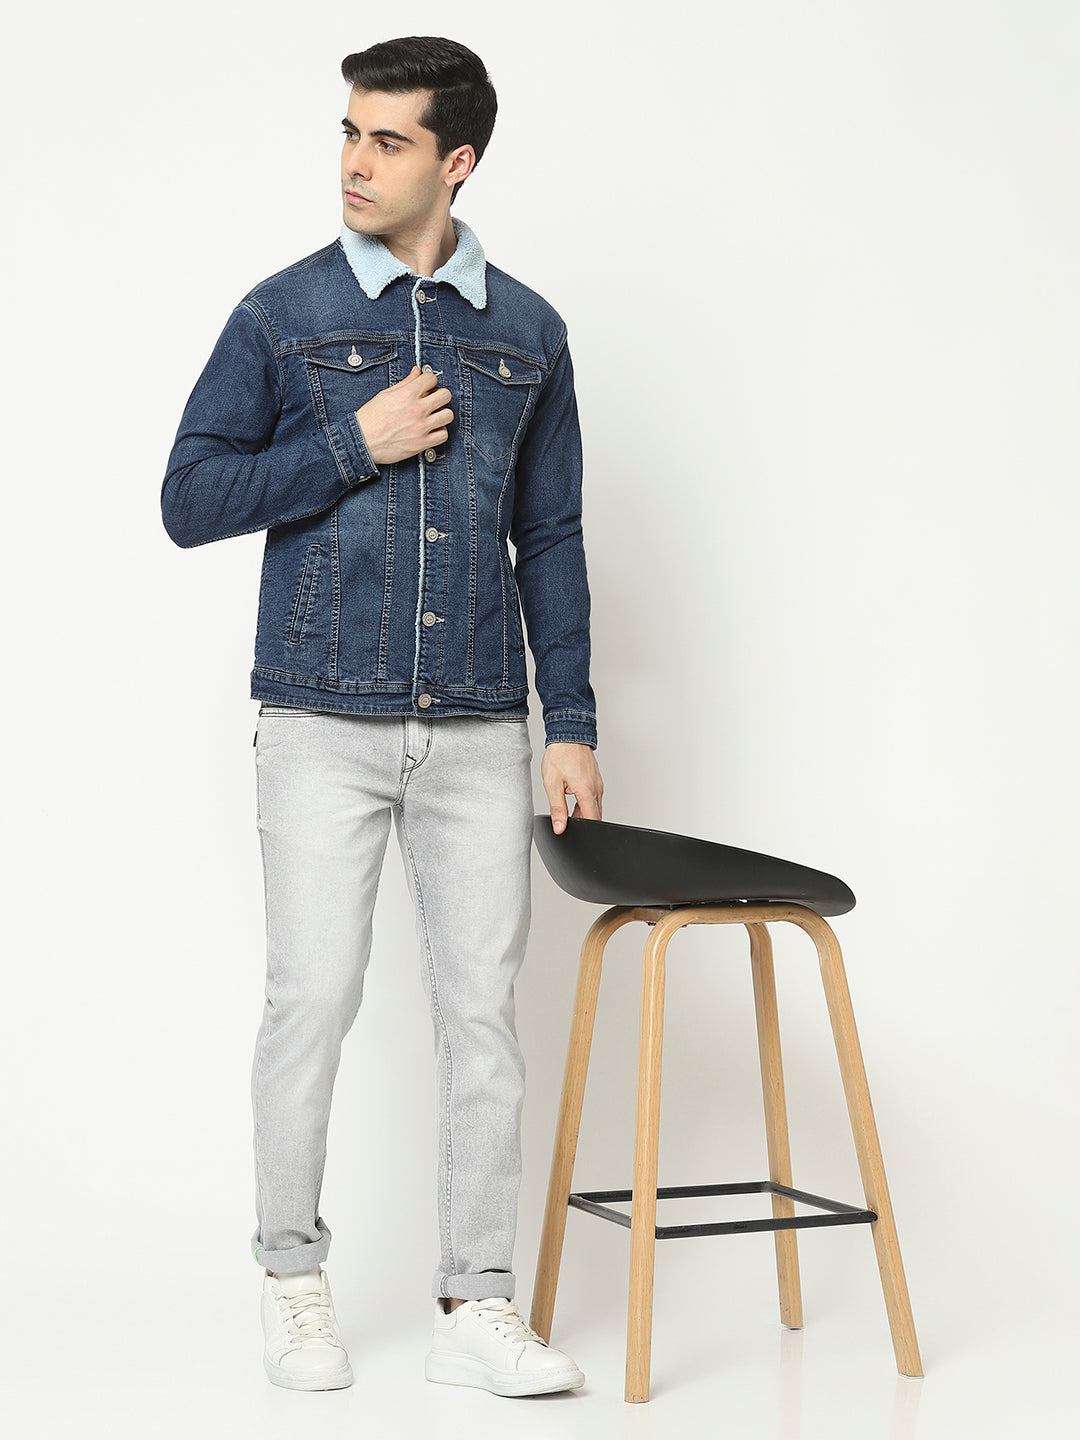 Blue Jean Denim Jacket with Raccoon Cuff Collar and Tuxedo - Day Furs